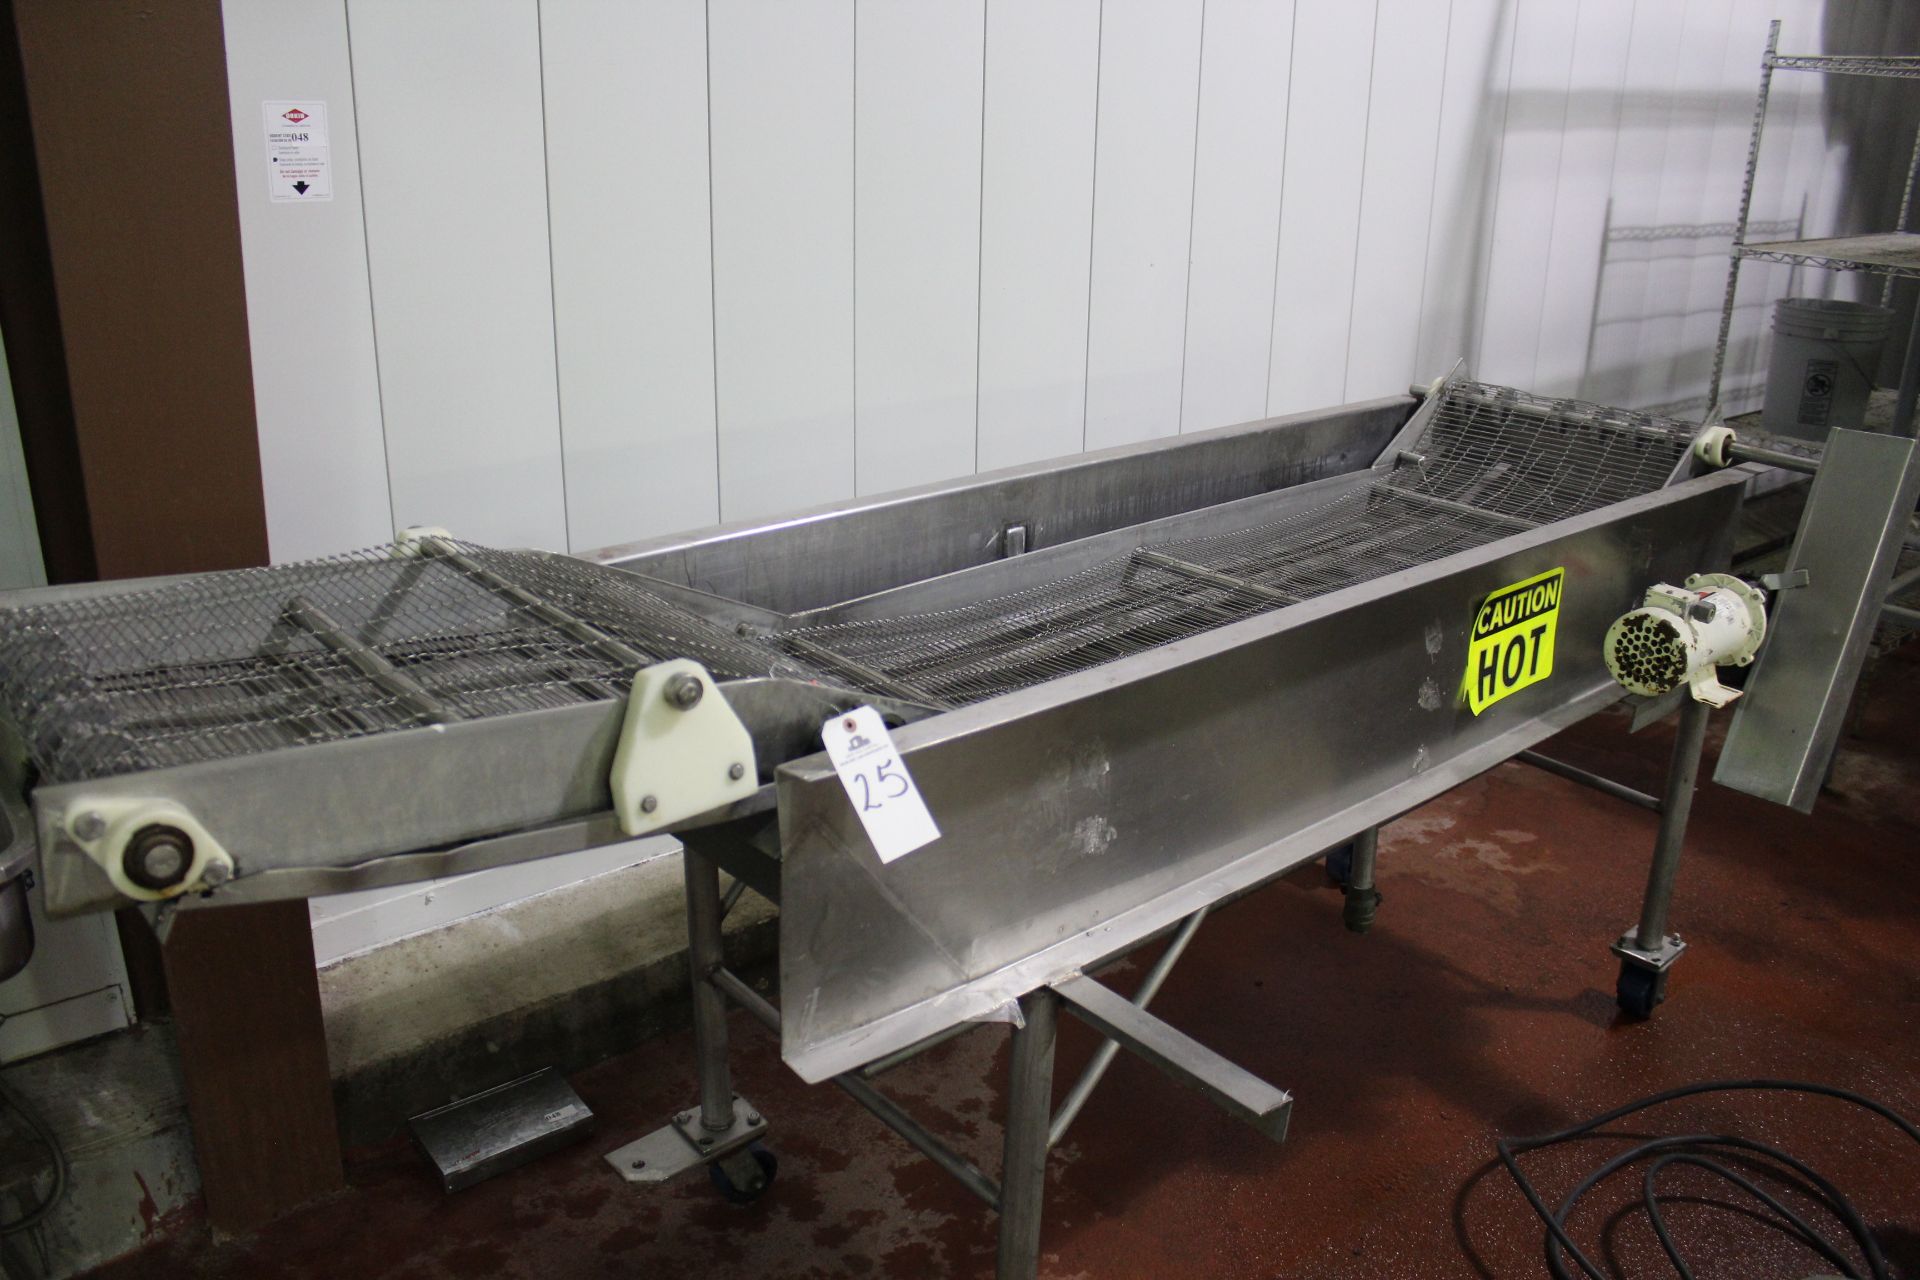 Stainless Steel Submersion Cooking Conveyor, 20" X 8' | Rigging Price: $300